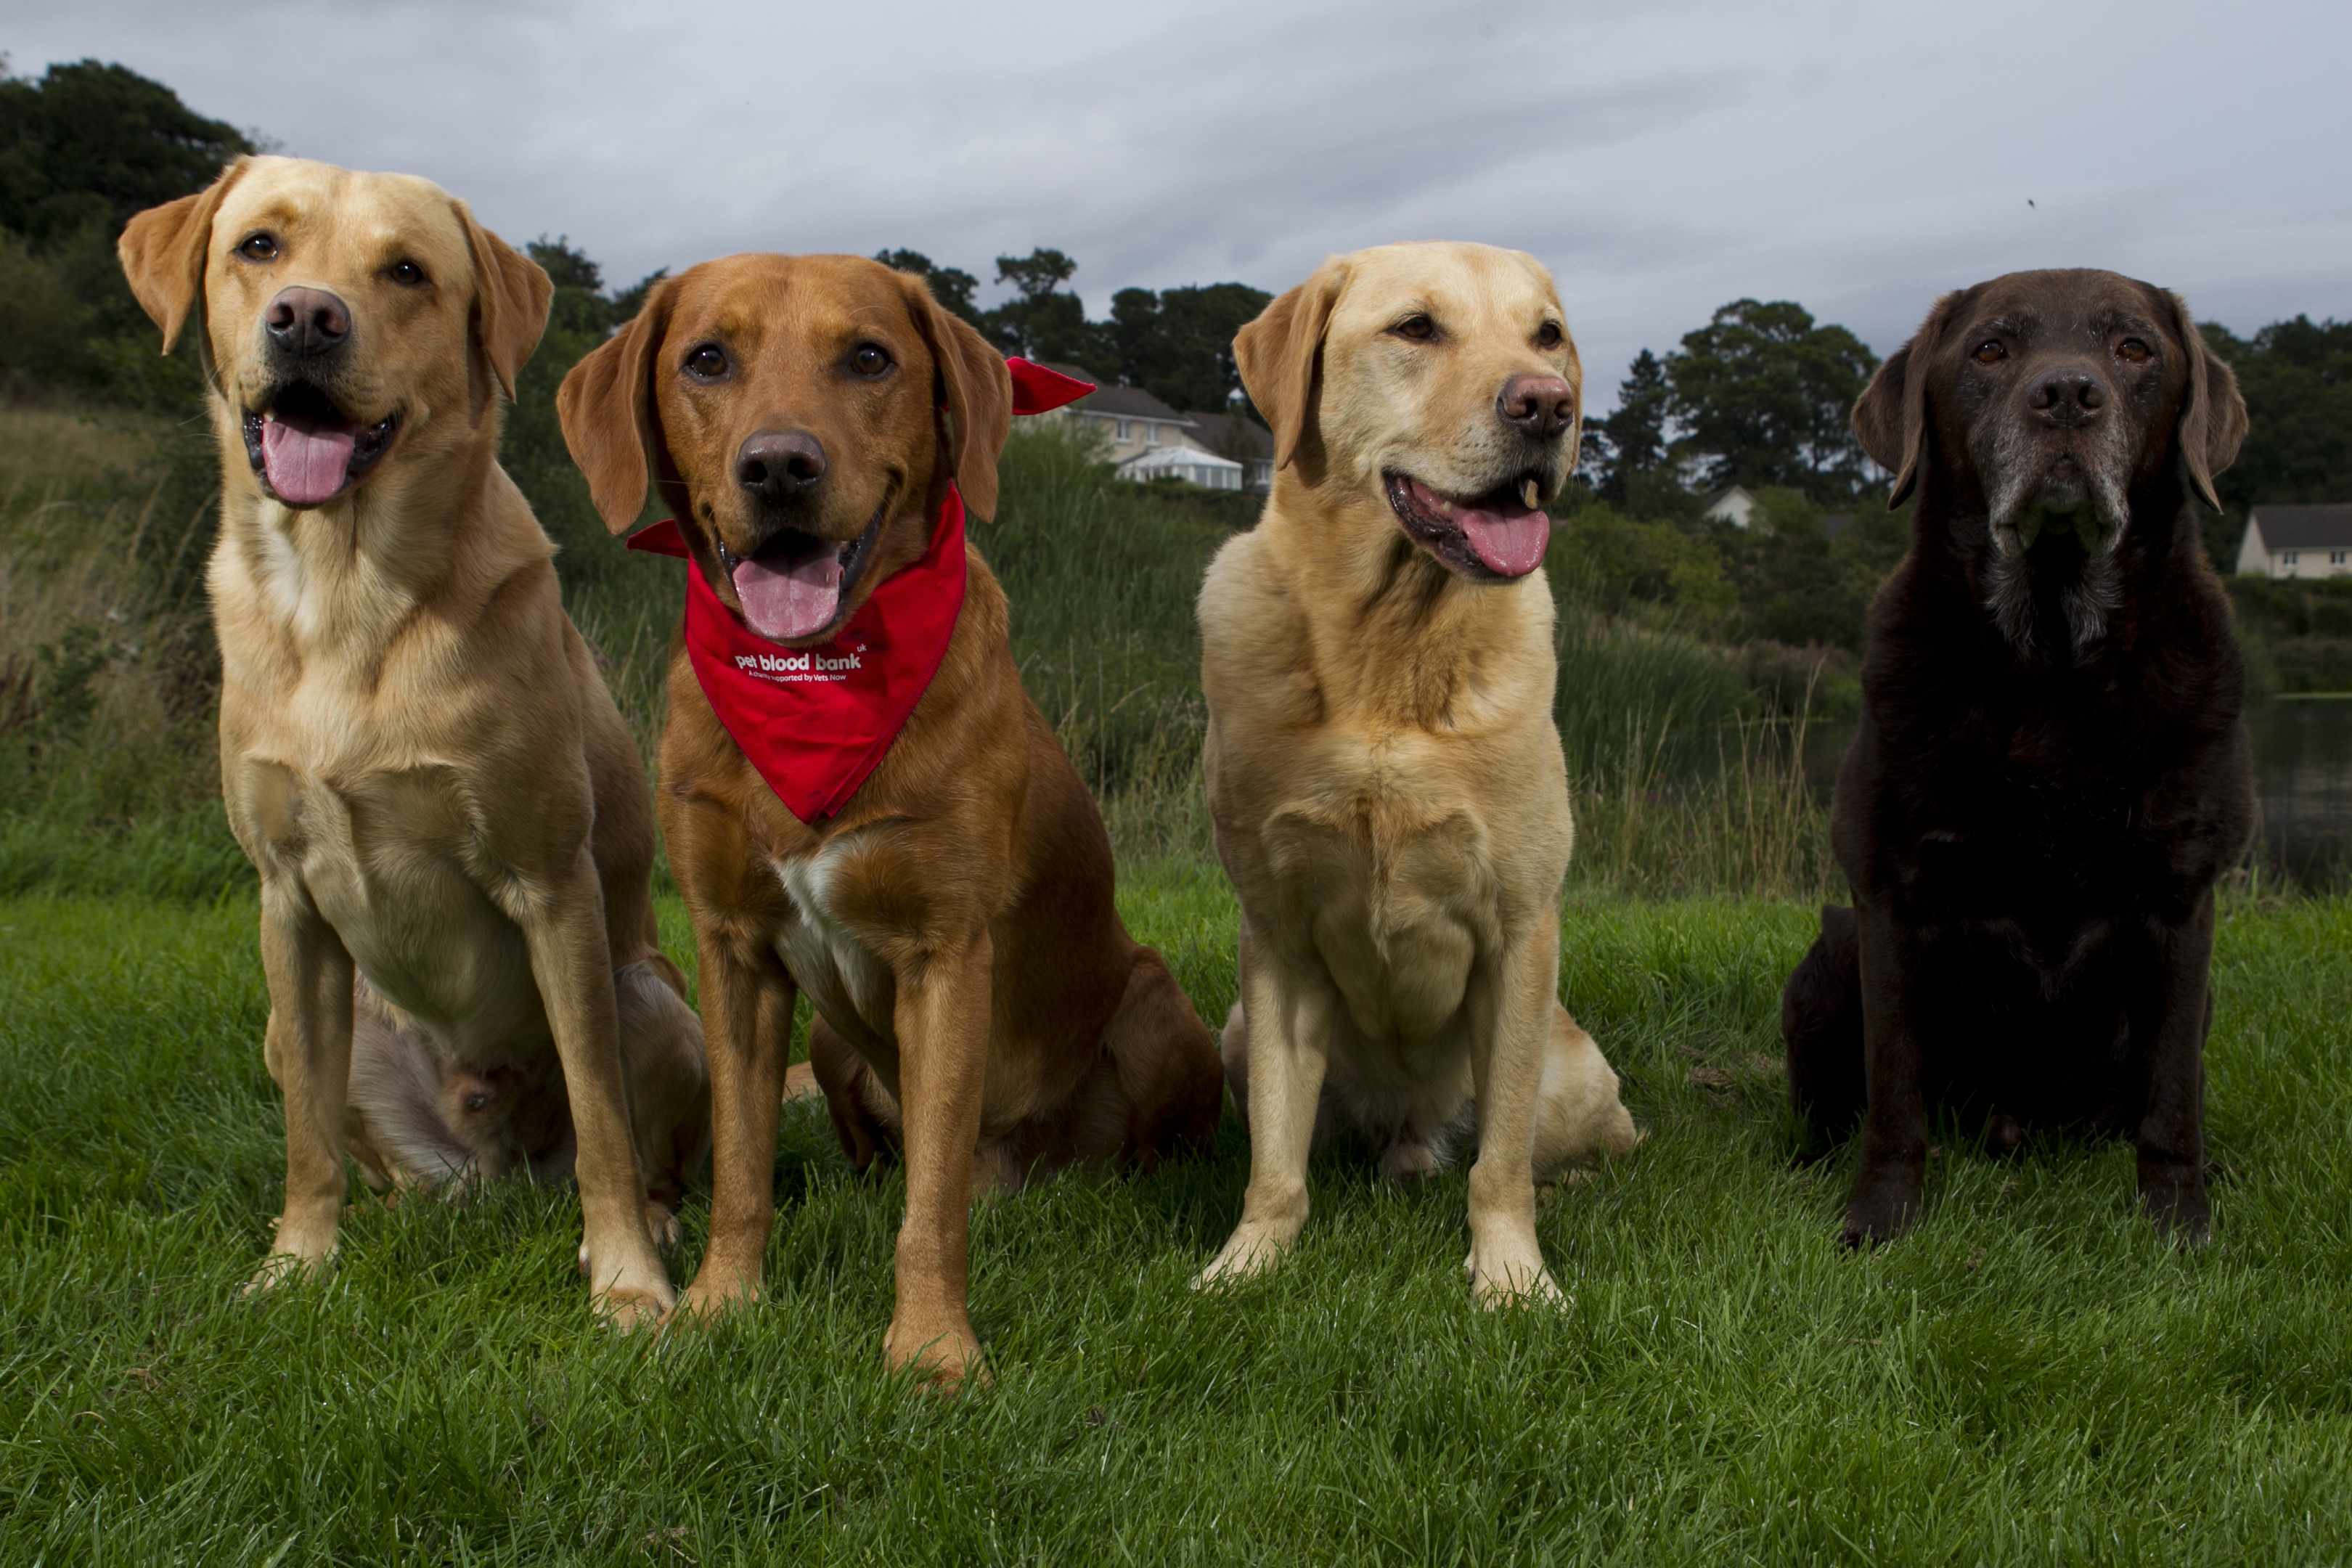 Left to right, Quincy, Zephyr, Pasco and Hudson (Andrew Cawley / DC Thomson)